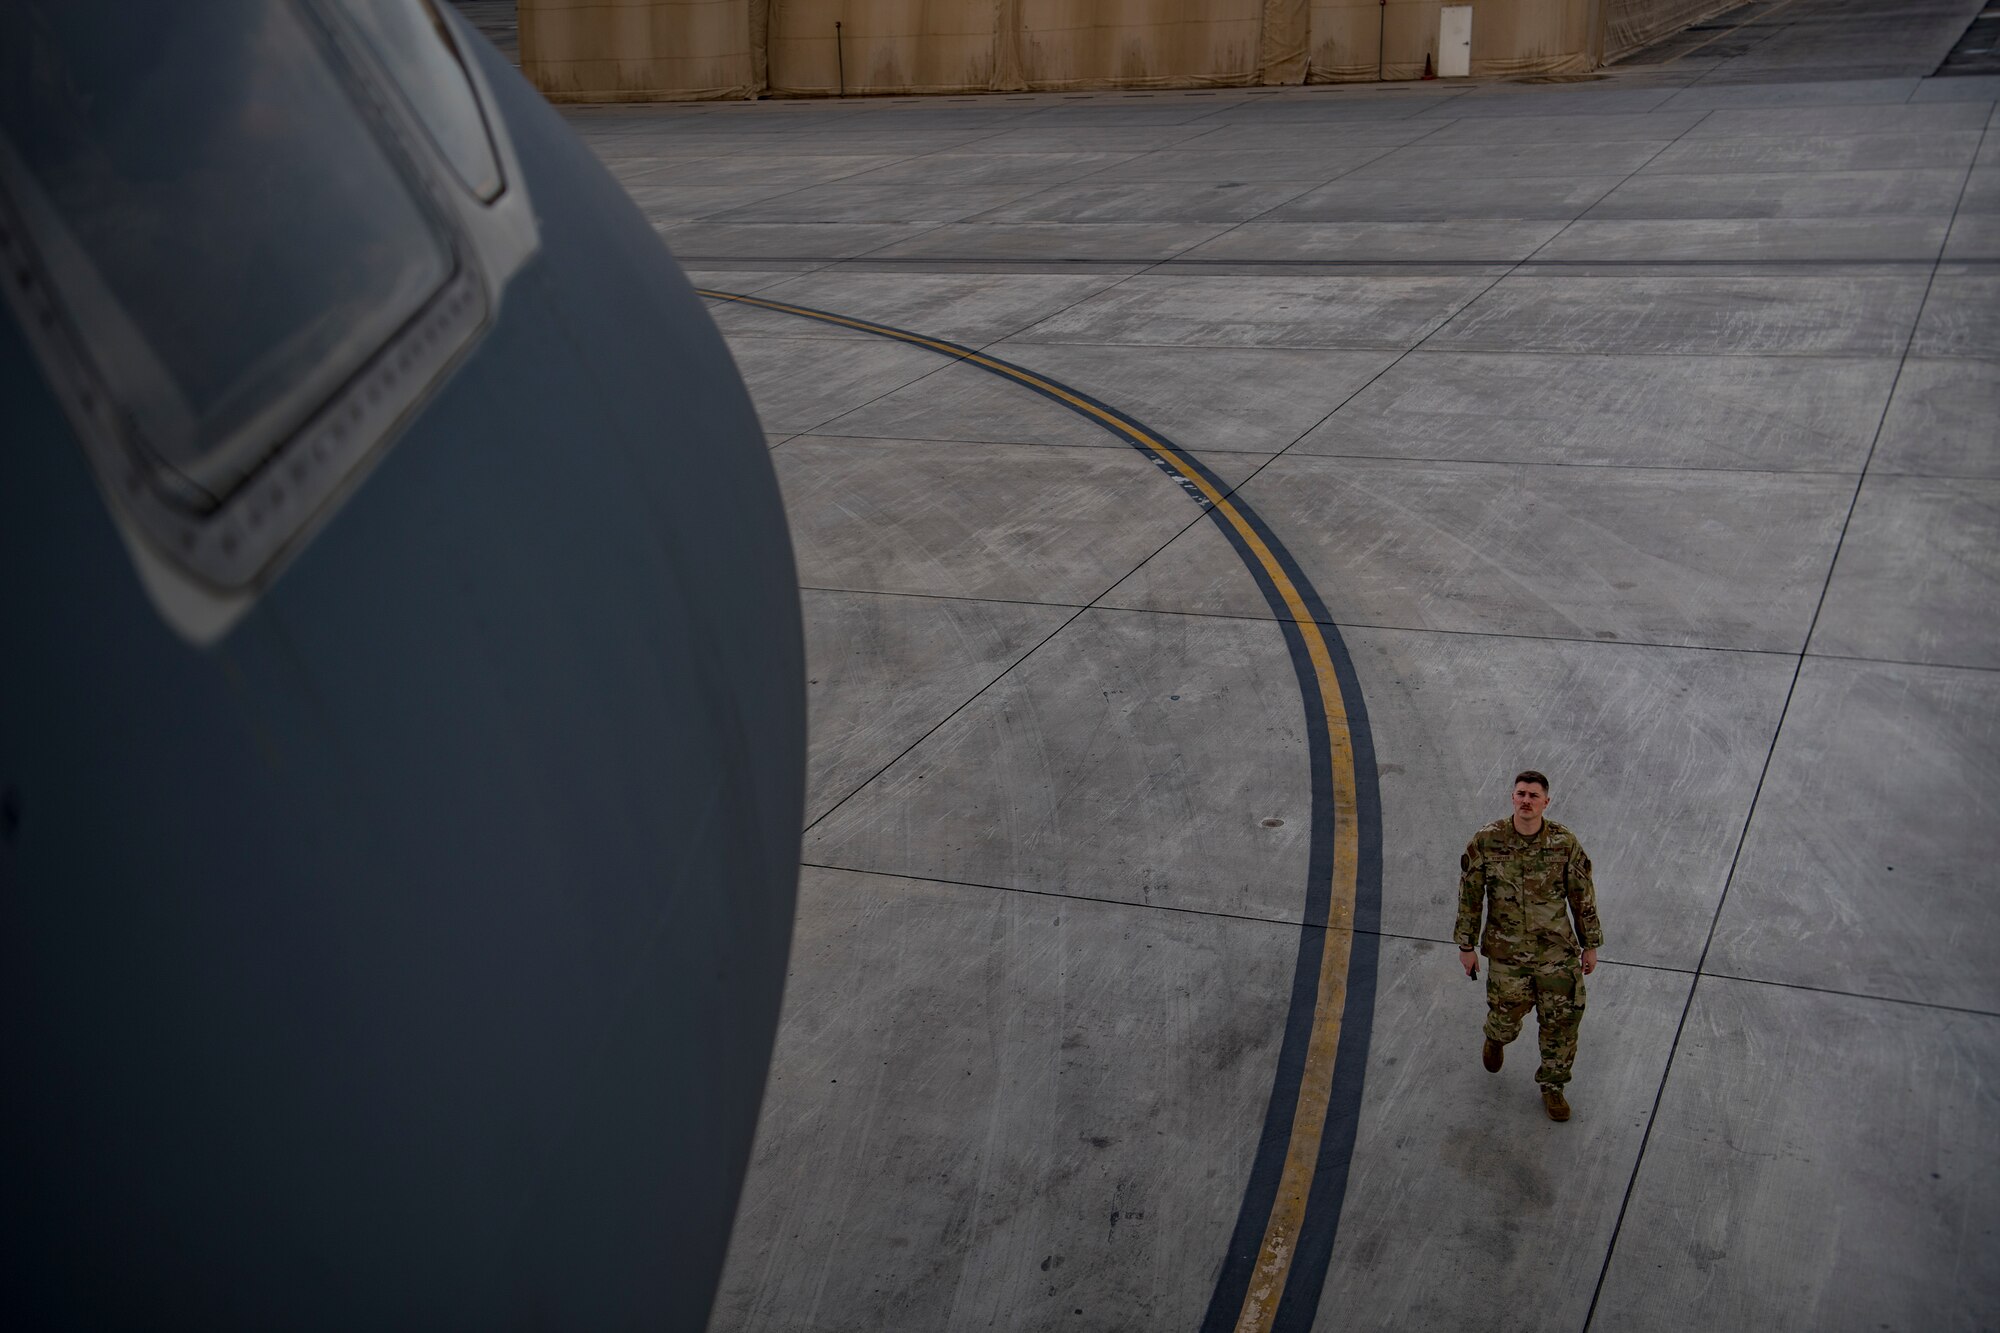 A U.S. Air Force flight engineer assigned to the 908th Expeditionary Air Refueling Squadron conducts preflight checks on a KC-10 Extender at Al Dhafra Air Base, United Arab Emirates Jan. 13, 2020.